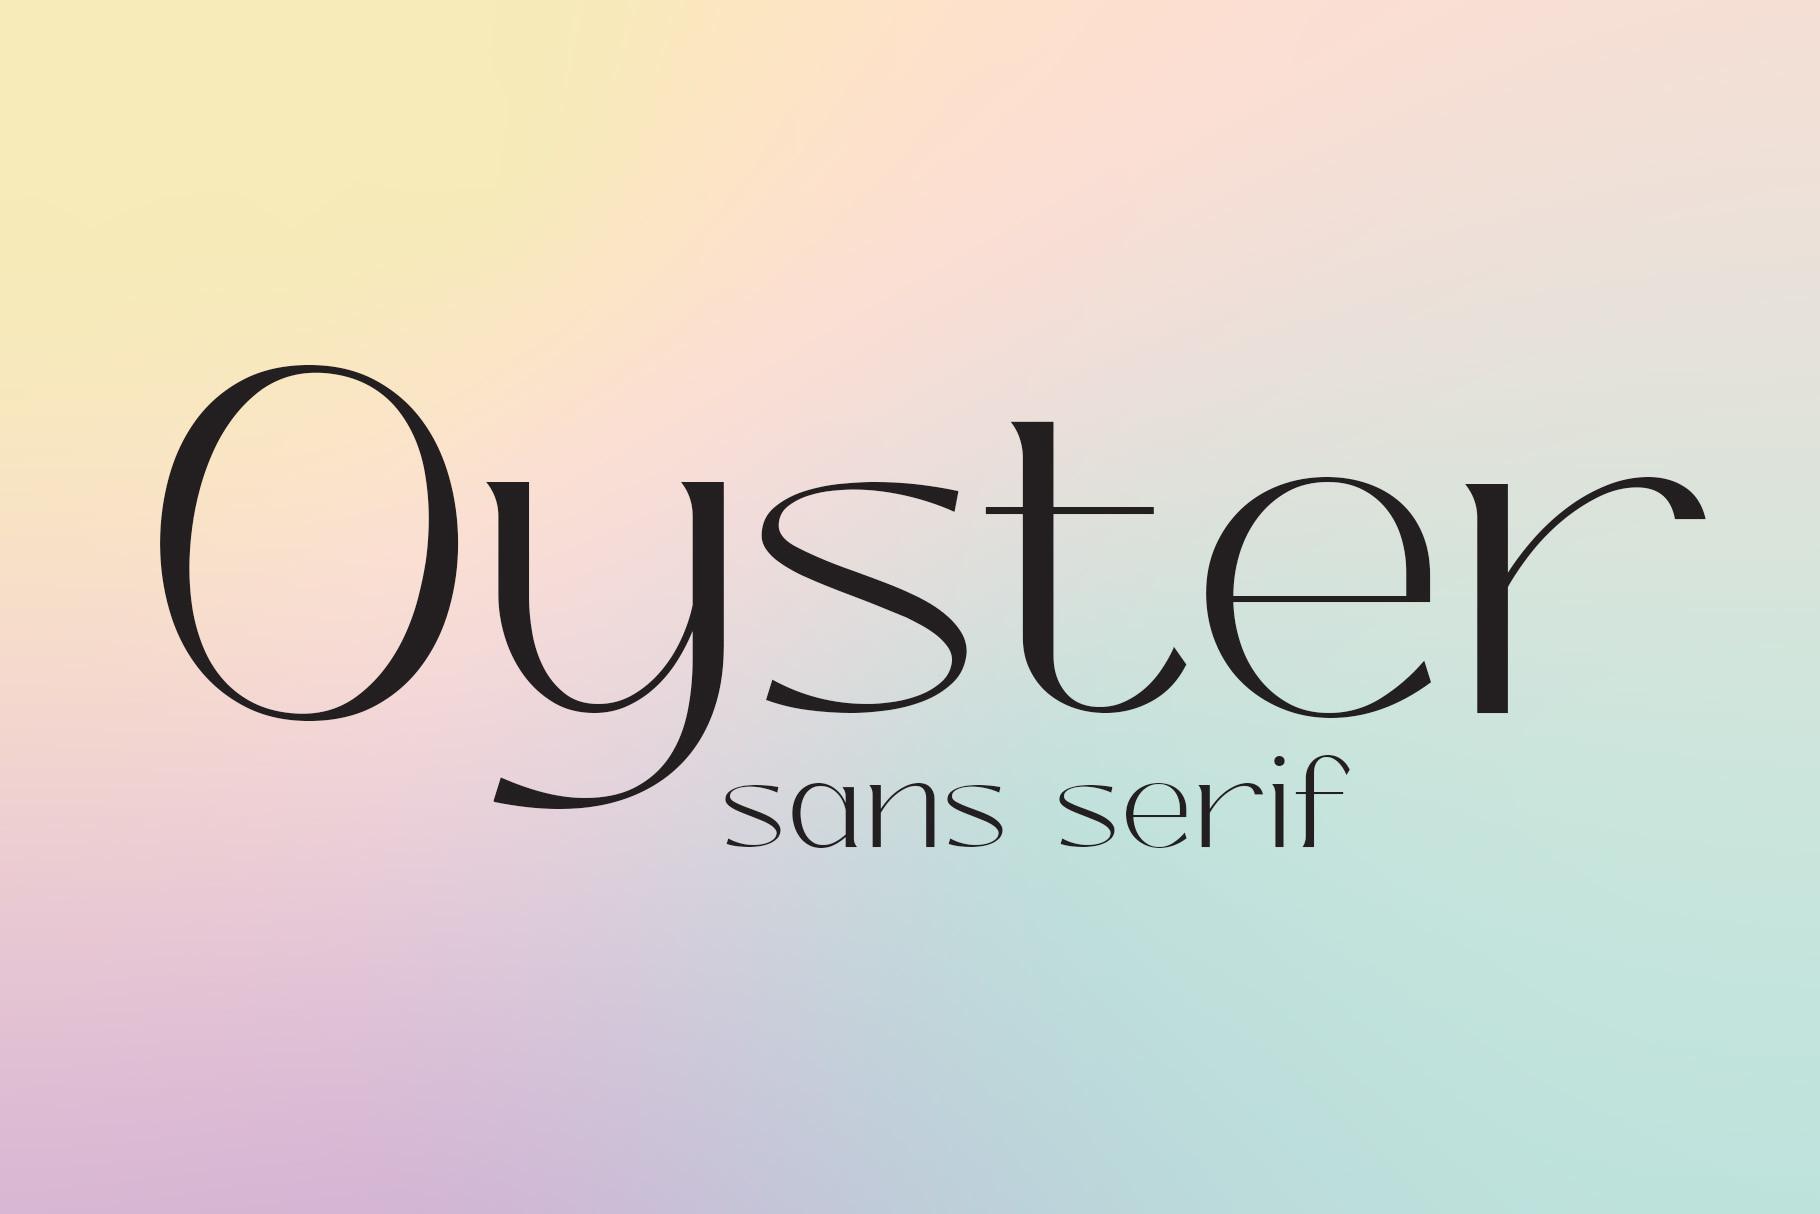 Oyster Font